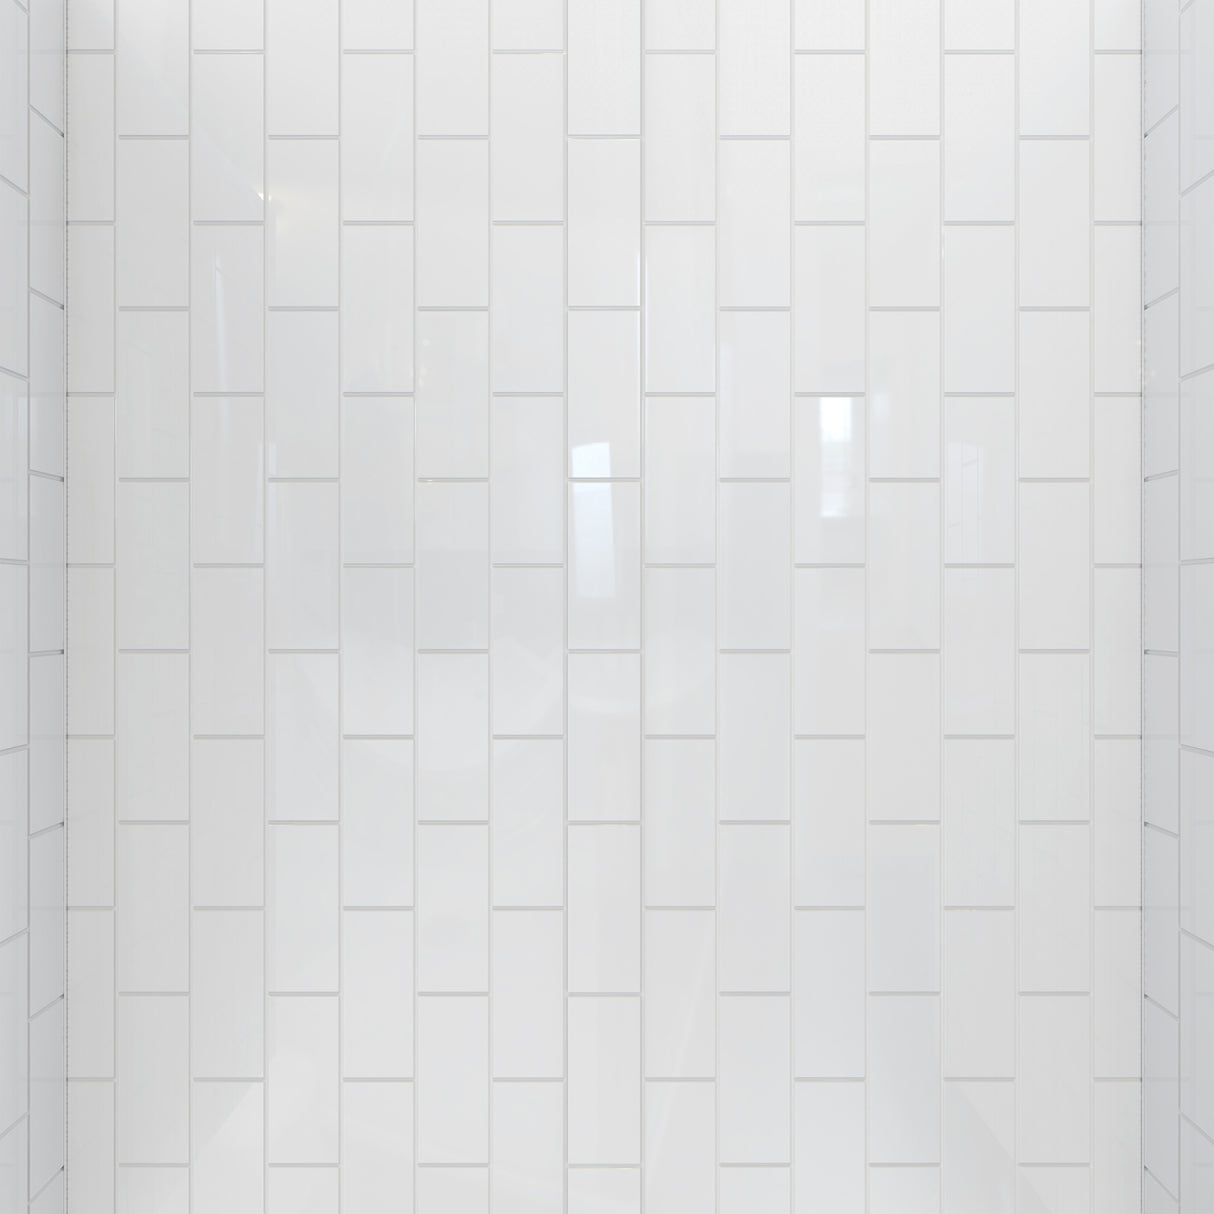 DreamLine Flex 34 in. D x 60 in. W x 78 3/4 in. H Pivot Shower Door, Base, and White Wall Kit in Chrome